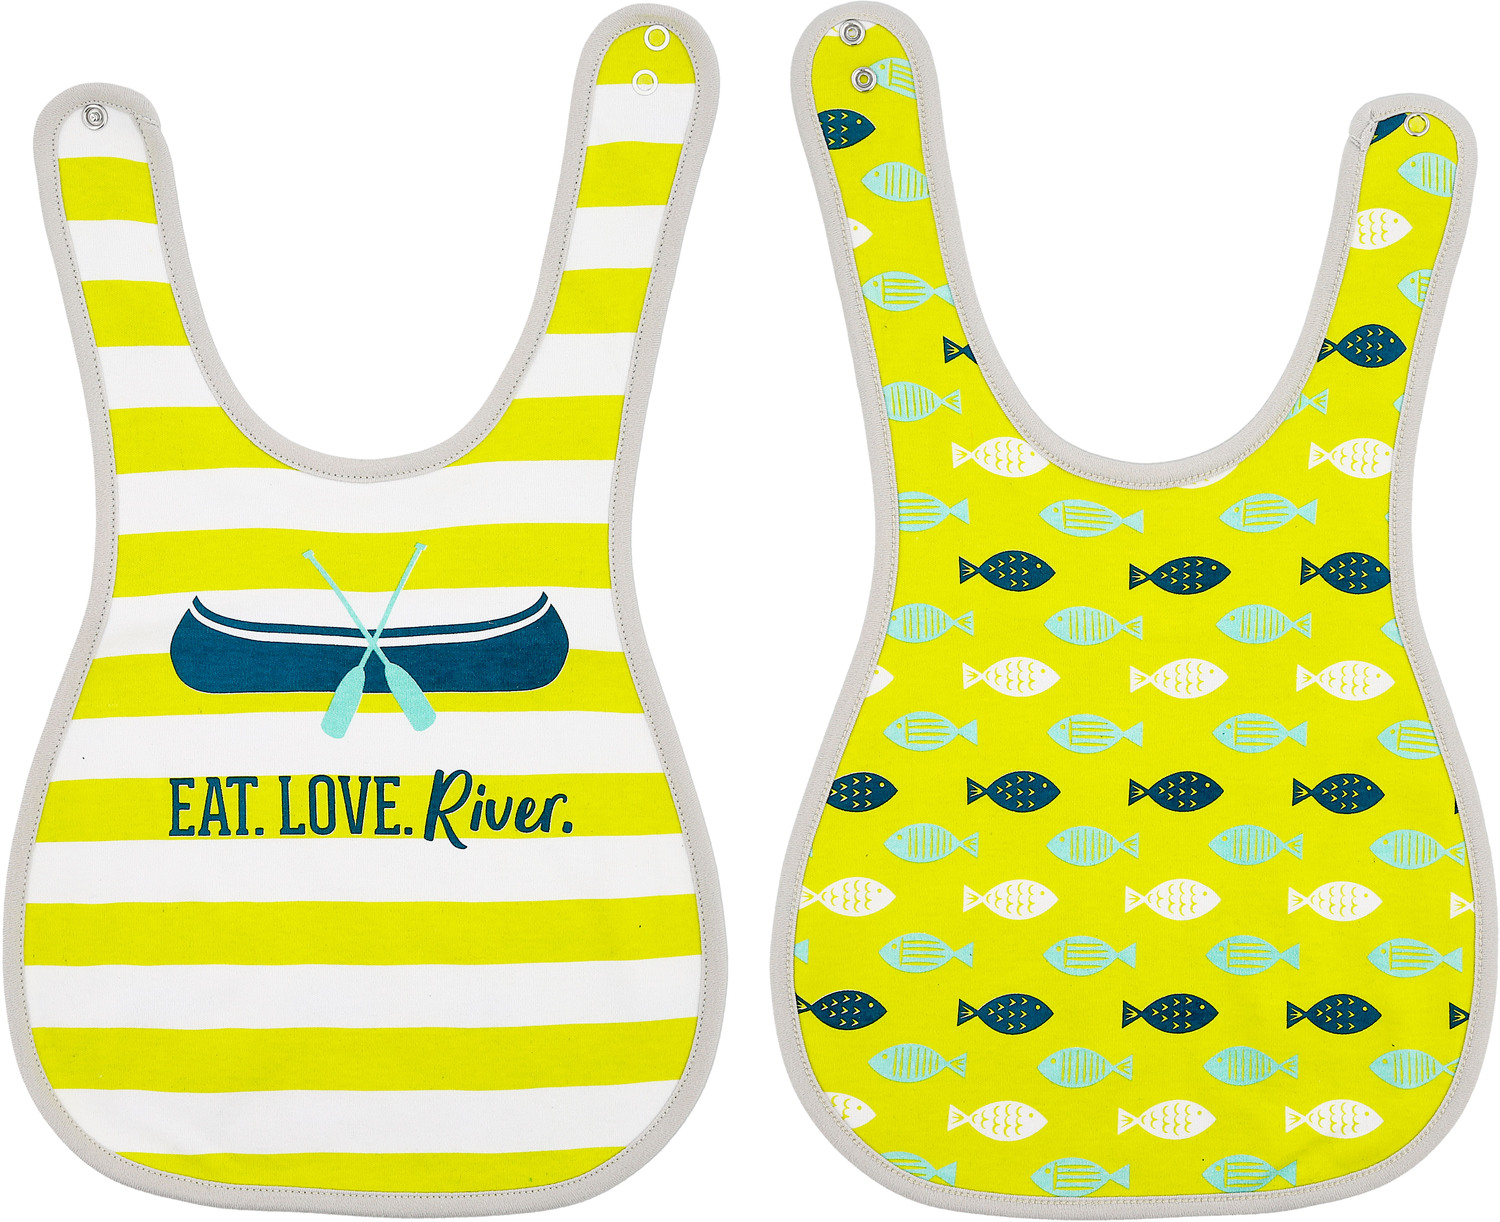 Canoes and Fish by We Baby - Canoes and Fish - Reversible Bib
(6M - 3 Years)